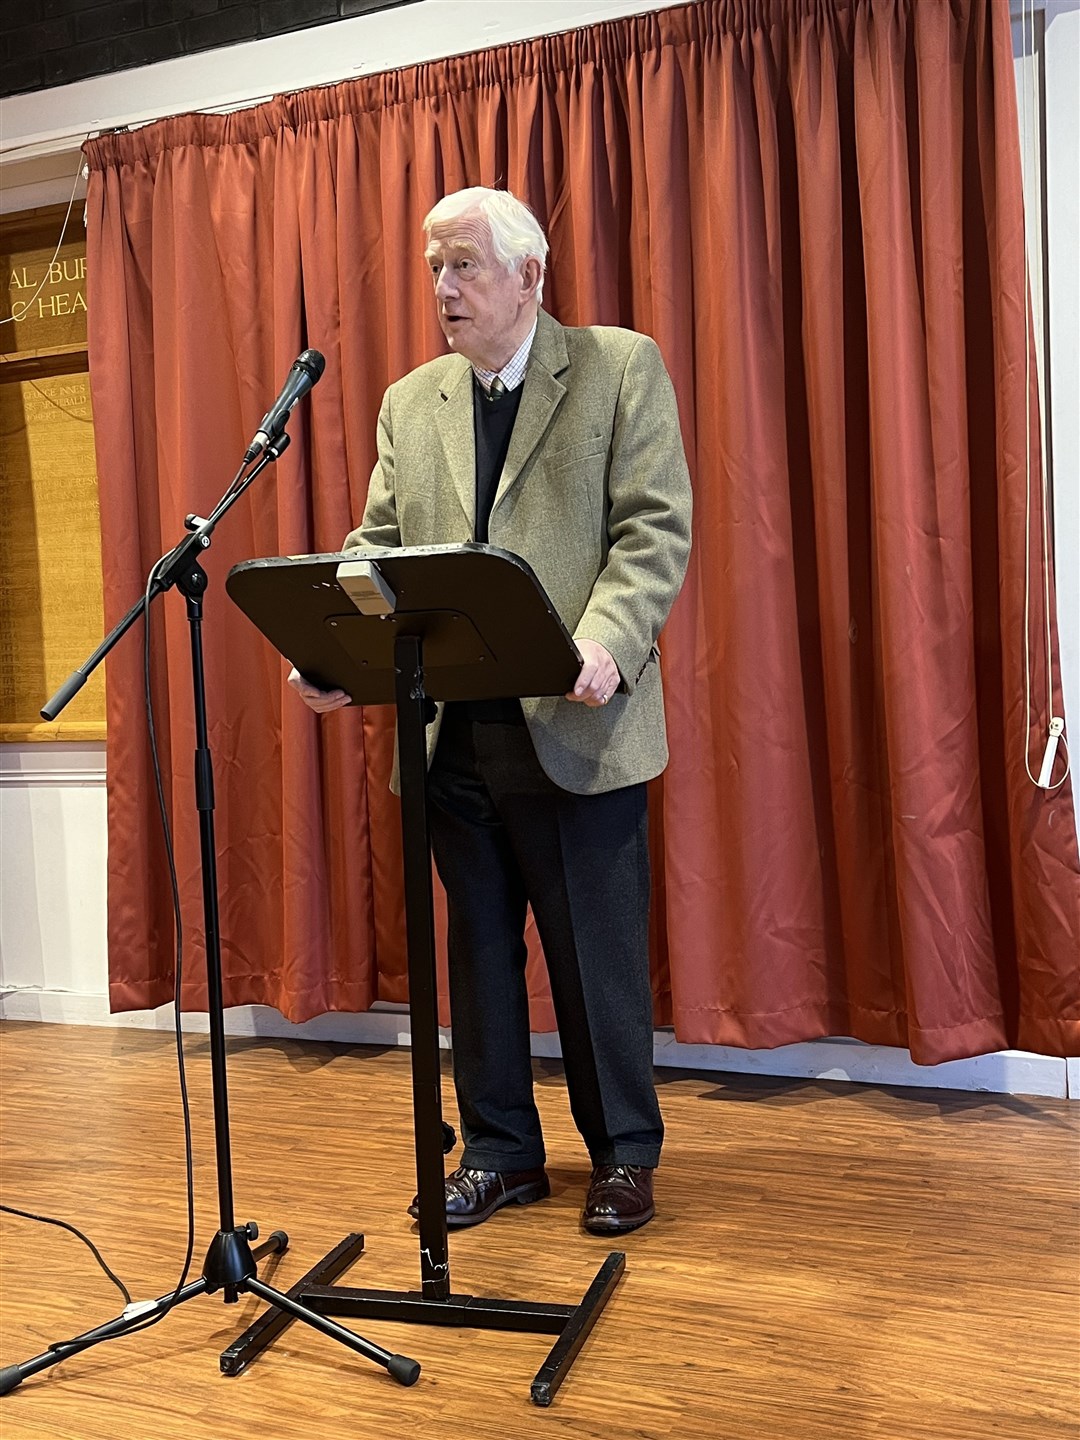 Lord-Lieutentant of Moray Seymour Monro delivered a speech at the event.